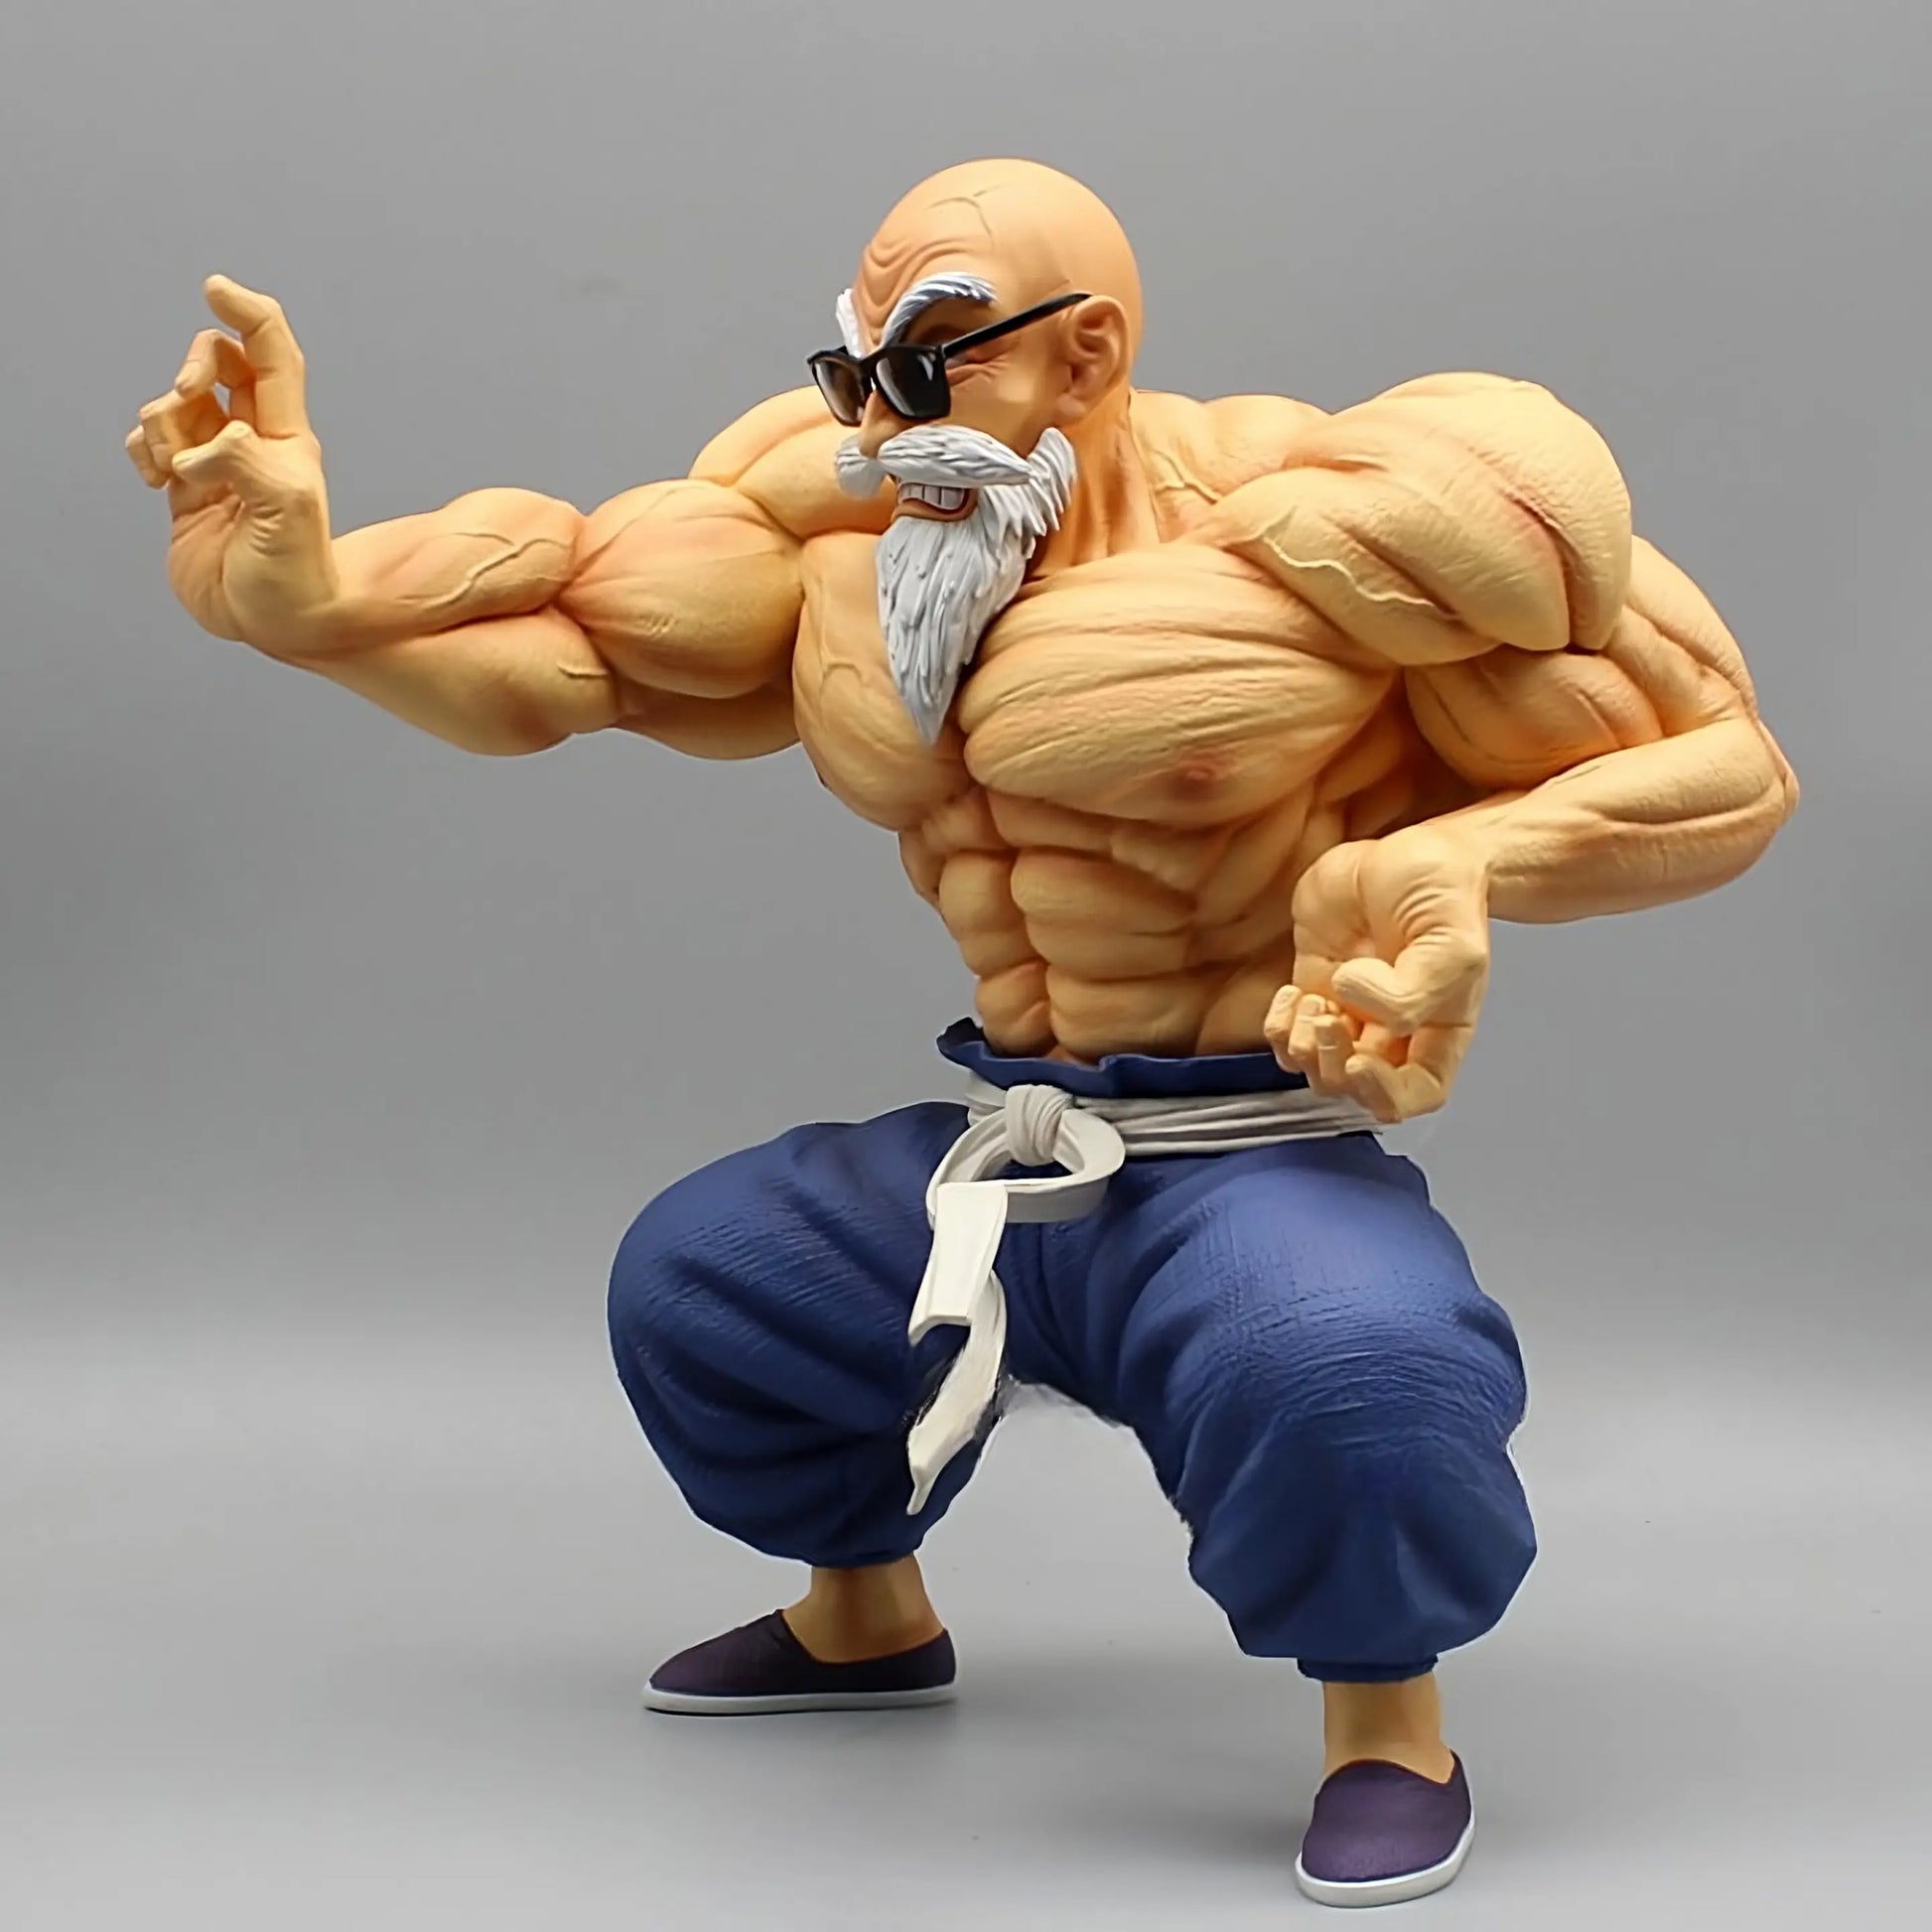 Muscle Master Roshi figure from Dragon Ball, angled to the side, showcasing his bulging muscles and combat-ready stance.